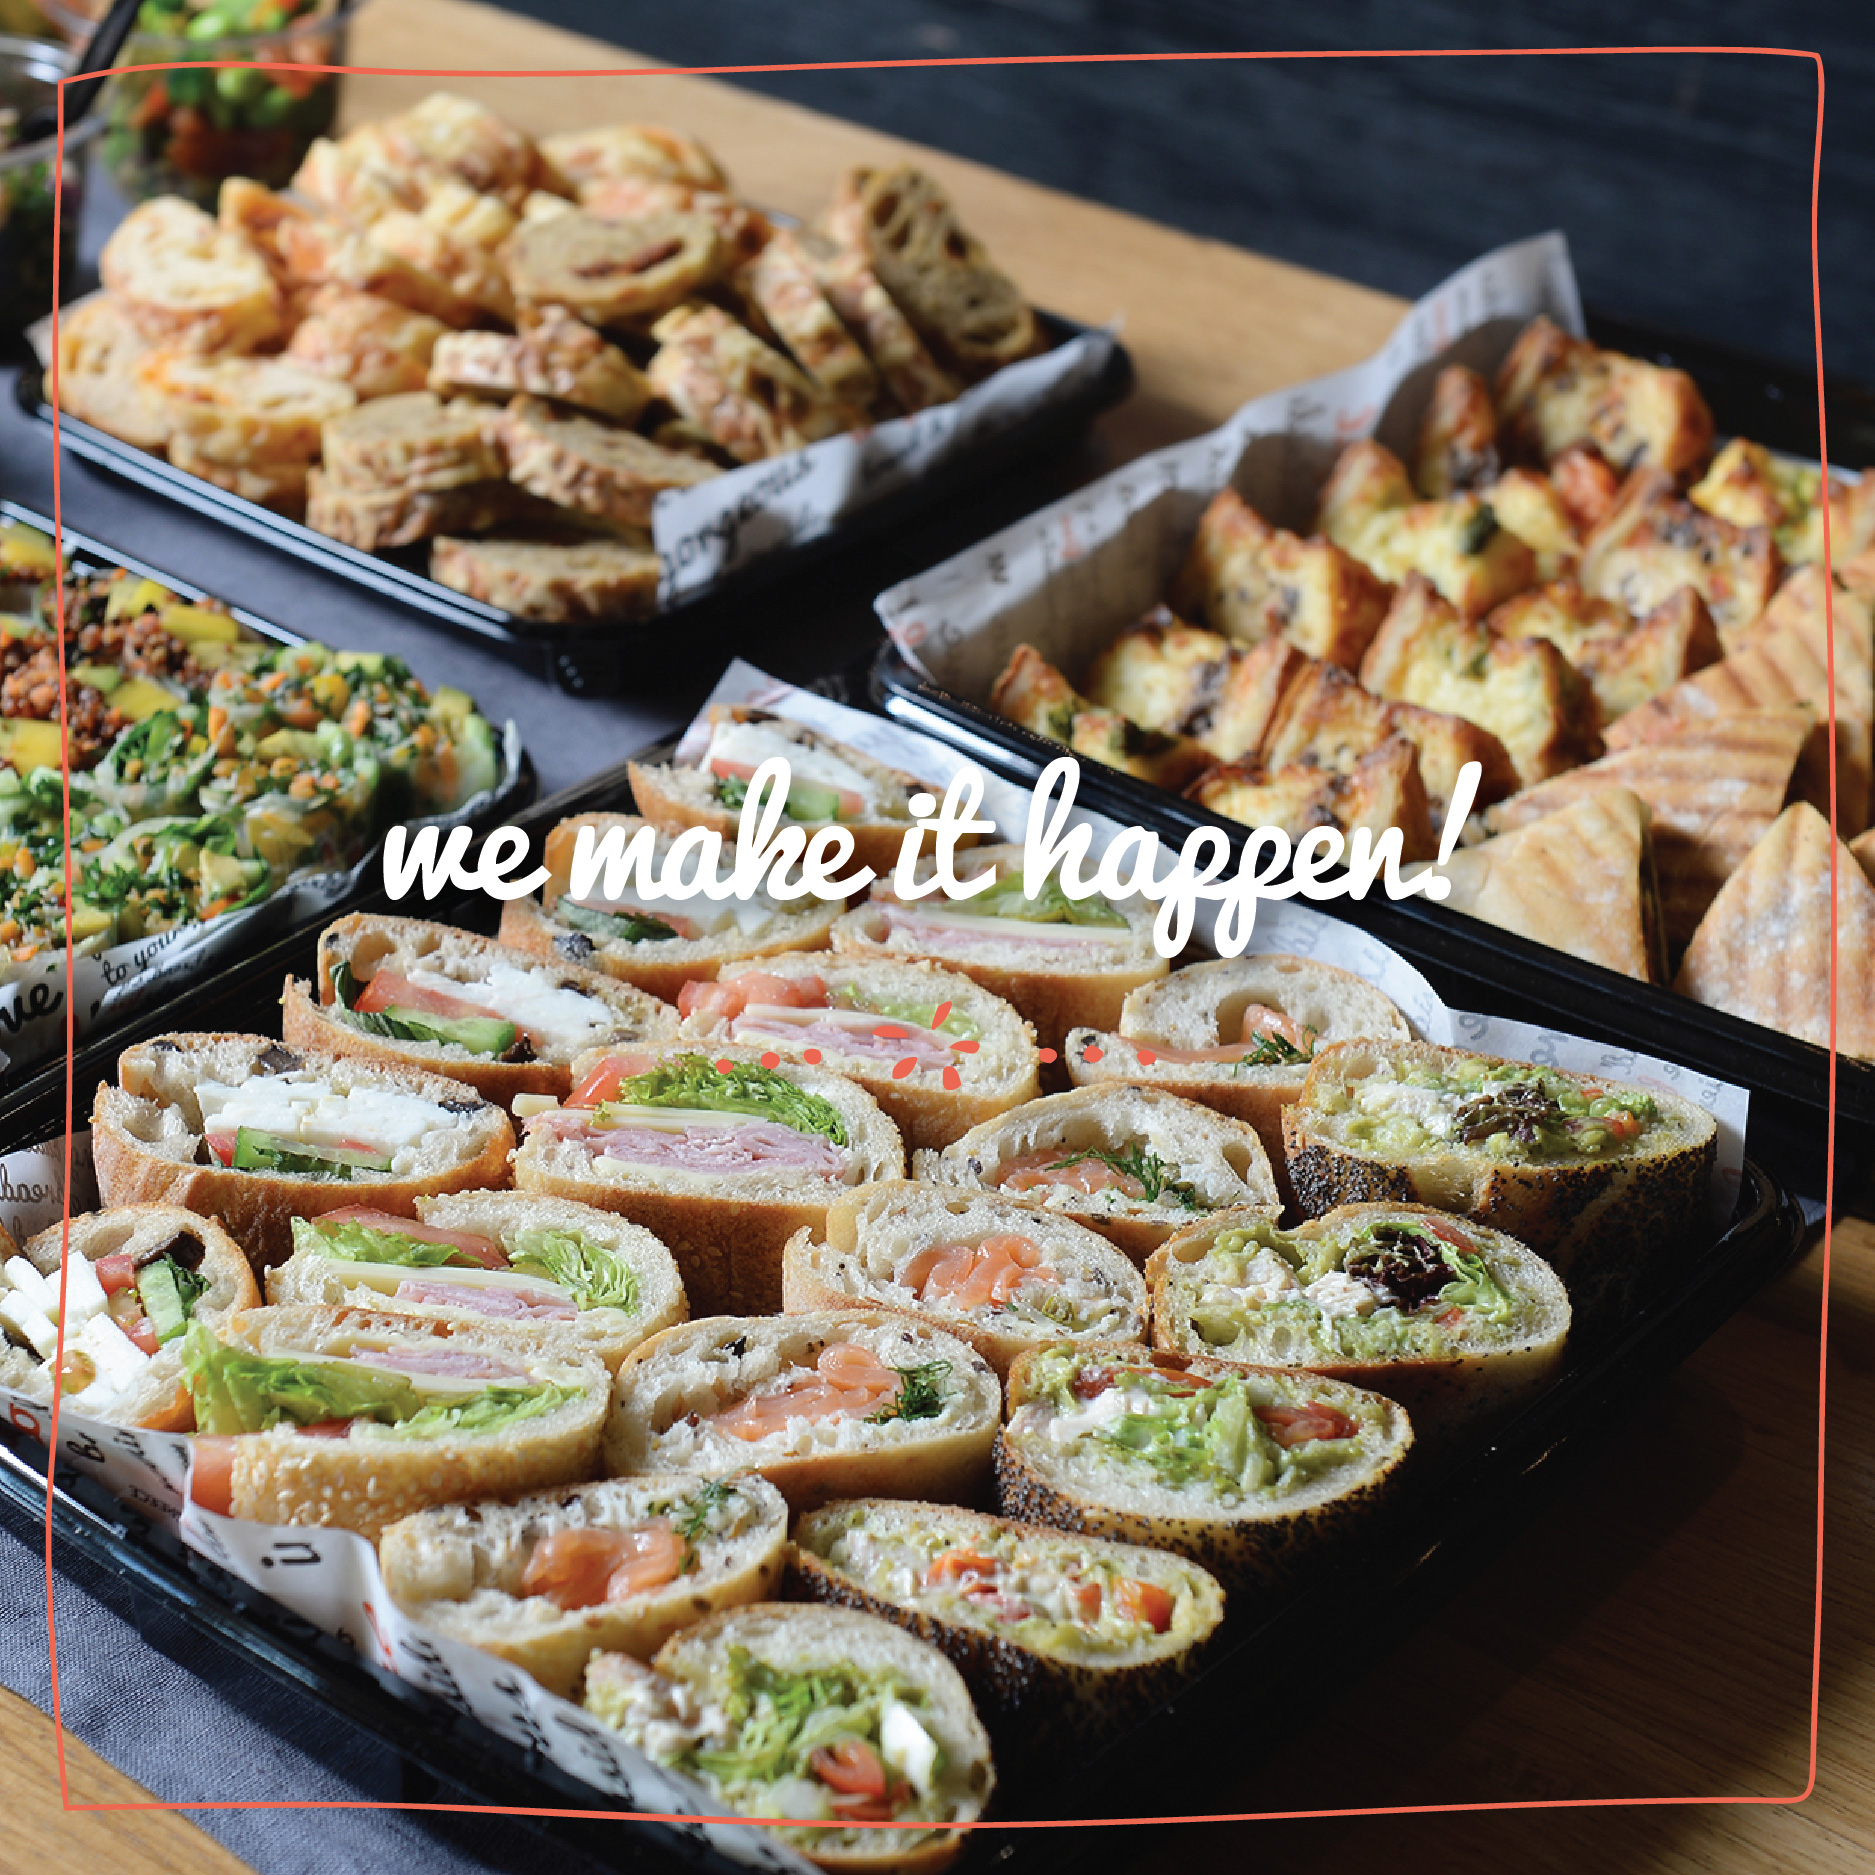 CATER WITH BARTARTINE!